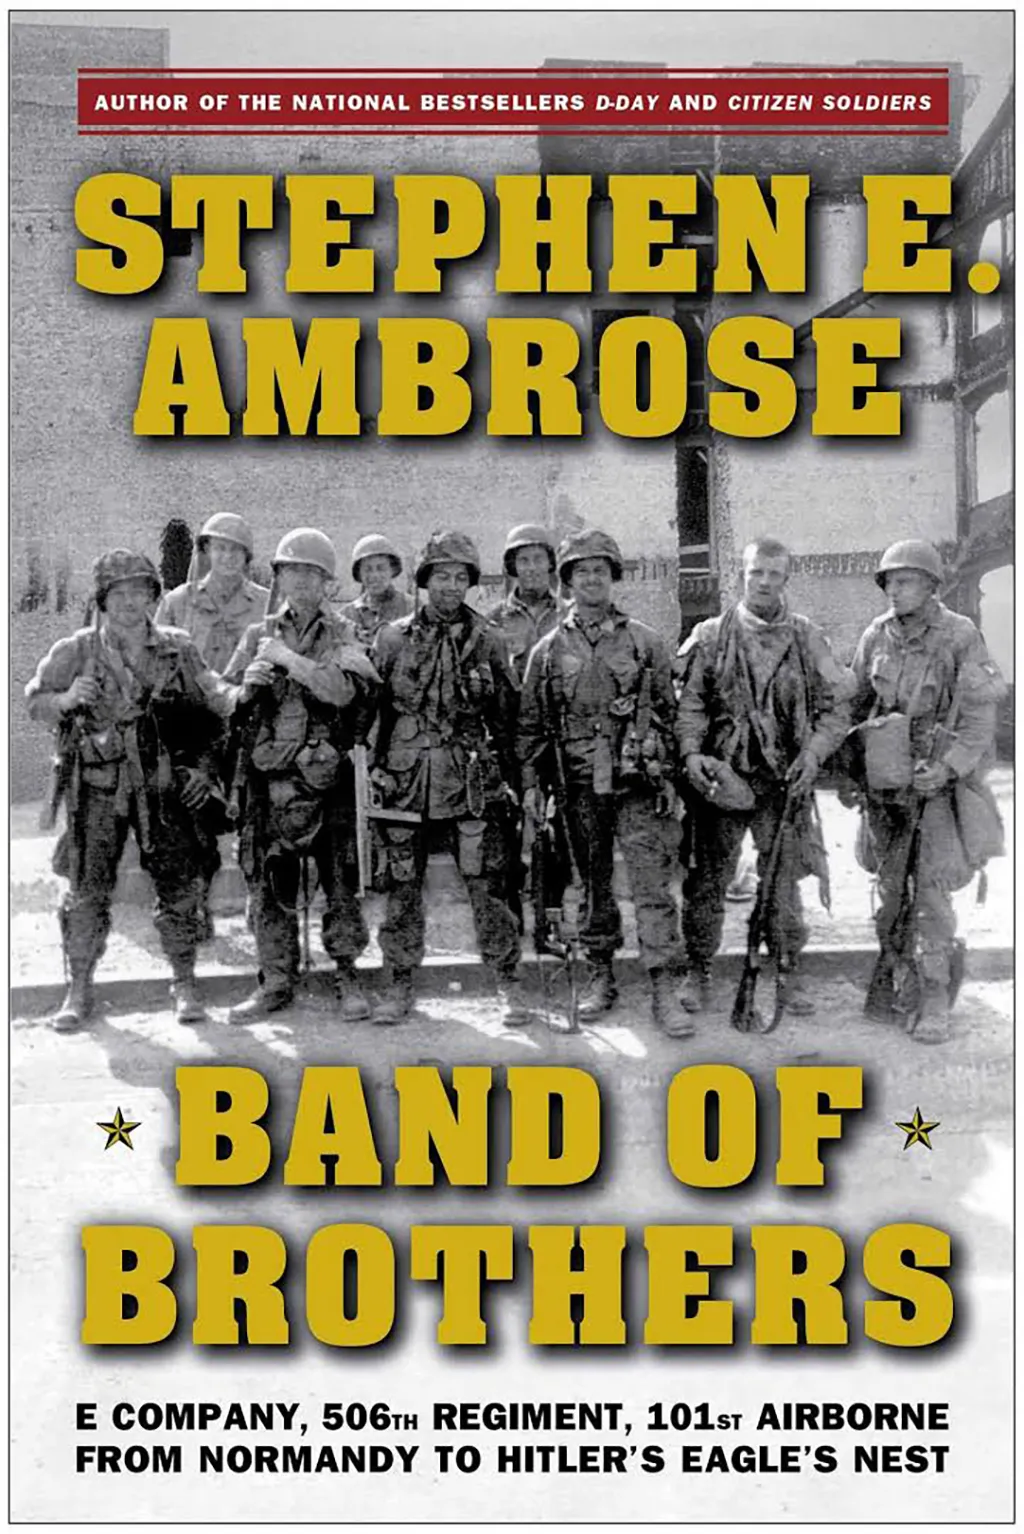 band of brothers, books every man should read